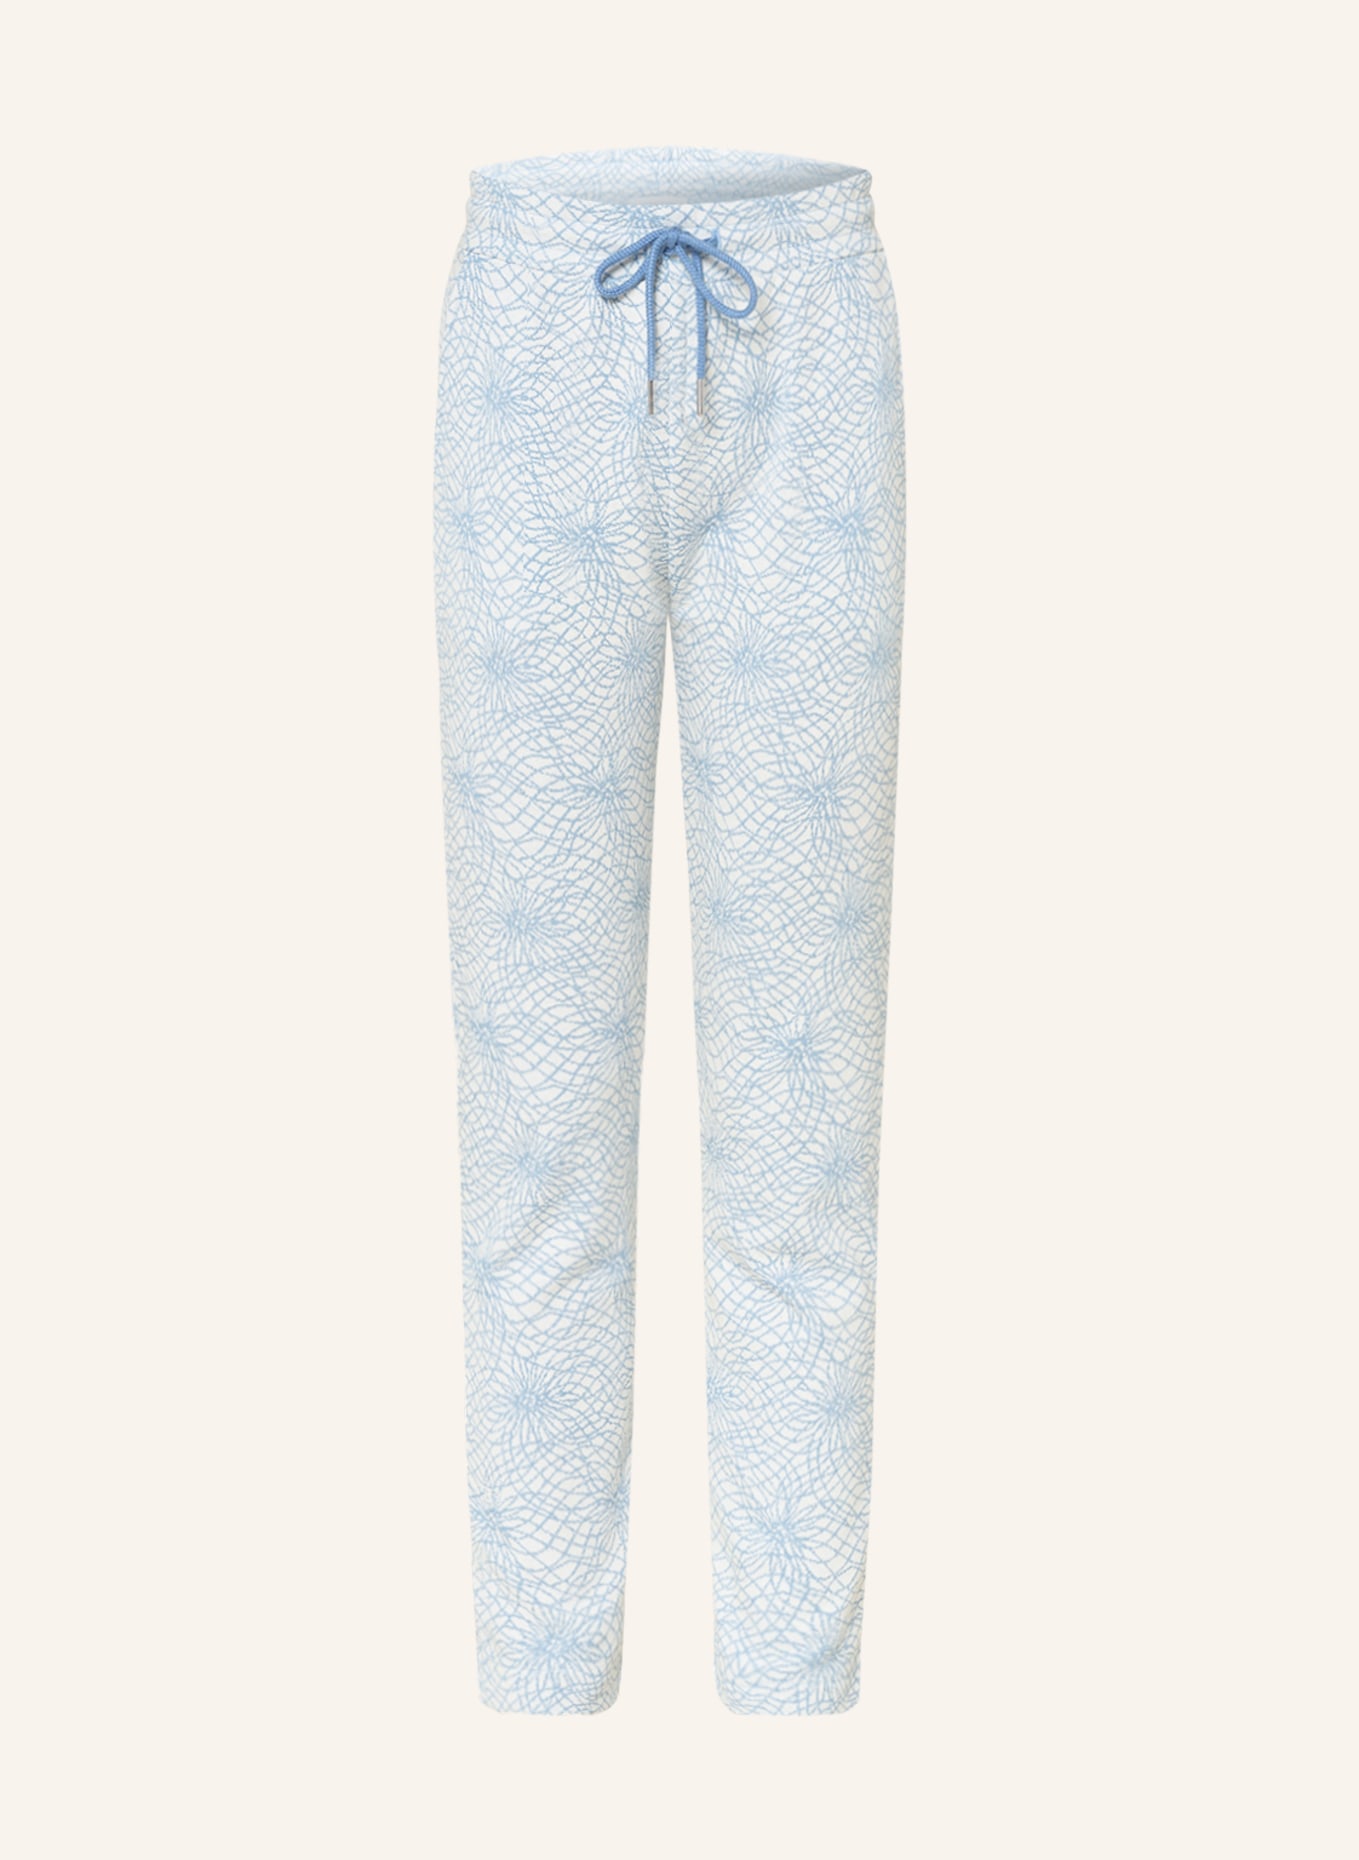 rich&royal Knit trousers in jogger style, Color: CREAM/ LIGHT BLUE/ SILVER (Image 1)